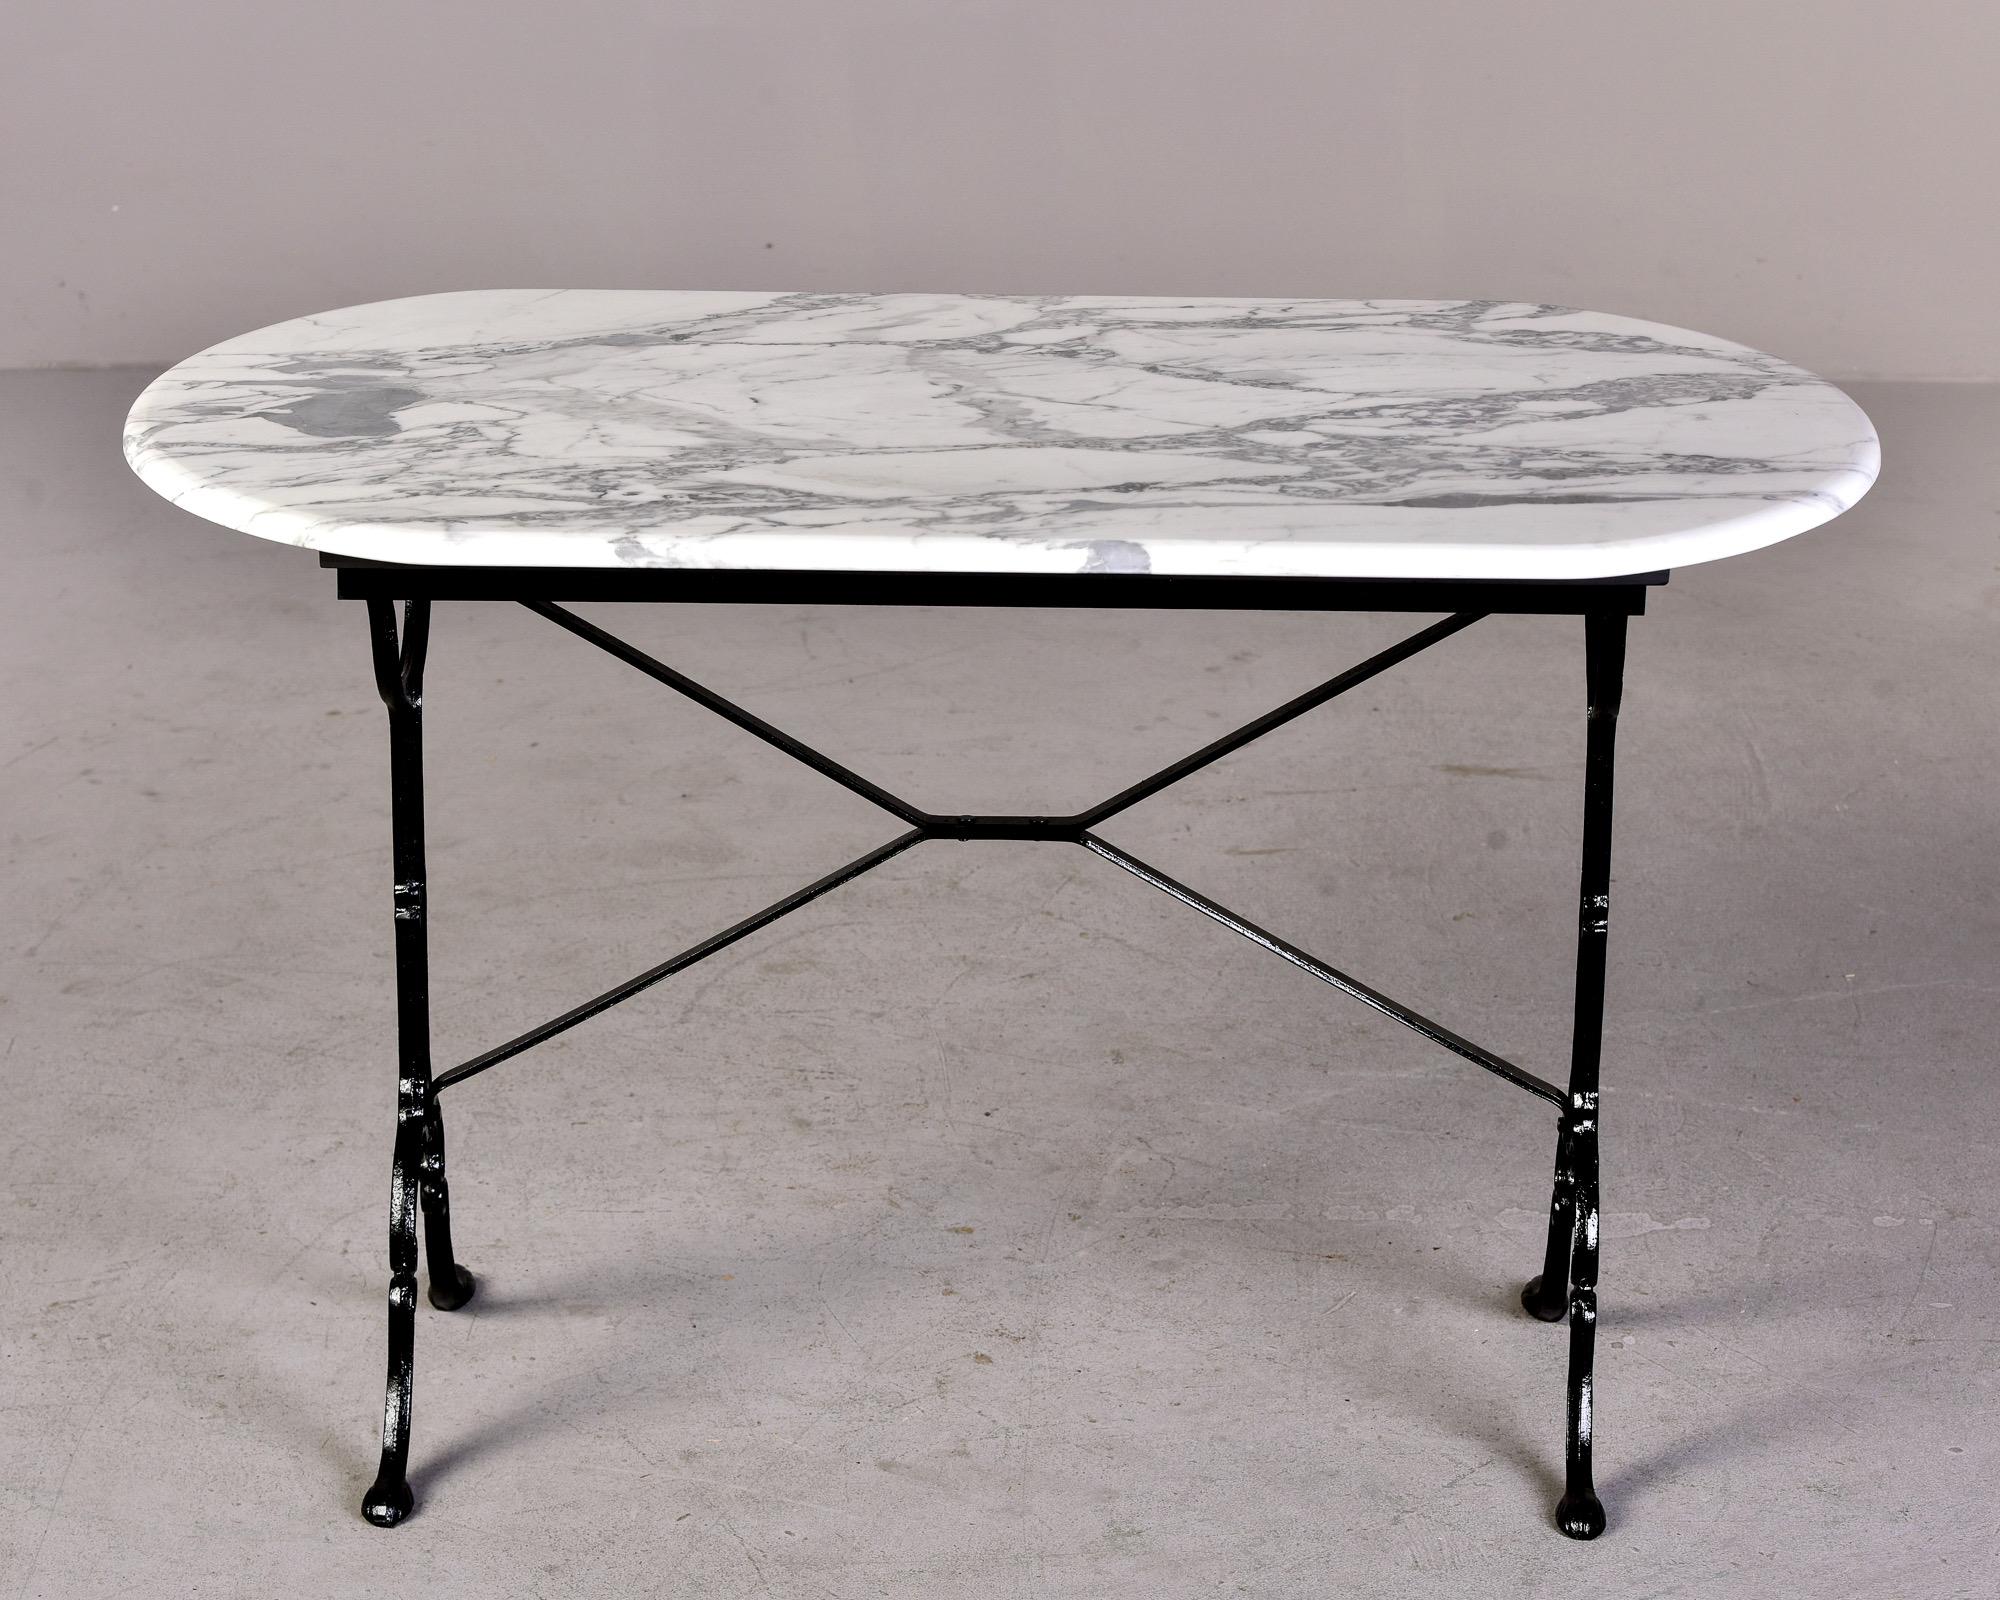 Circa 1920s French iron and marble bistro table. Iron base with black painted finish and new oval carrara marble top. Unknown maker. 